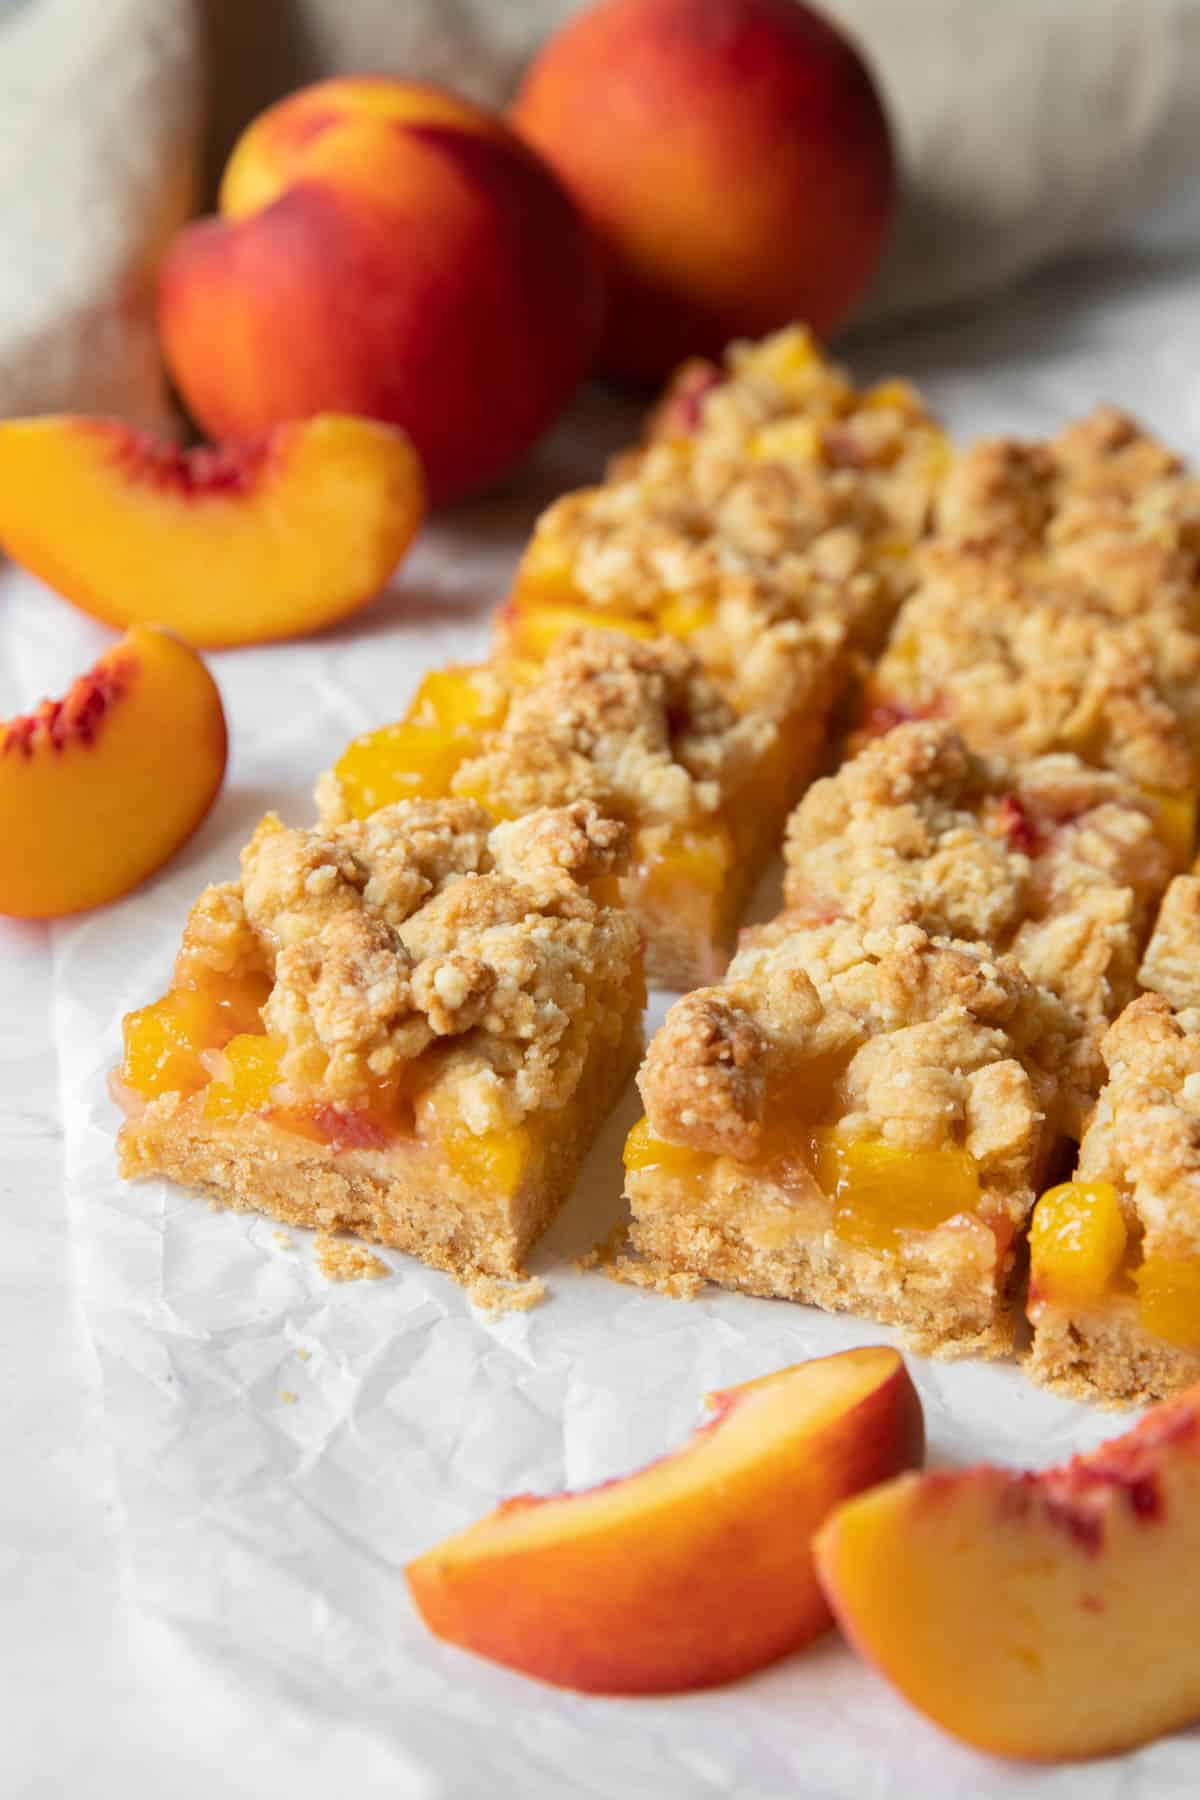 Baked peach bars sitting on white parchment paper with slices of fresh peaches off to the side.